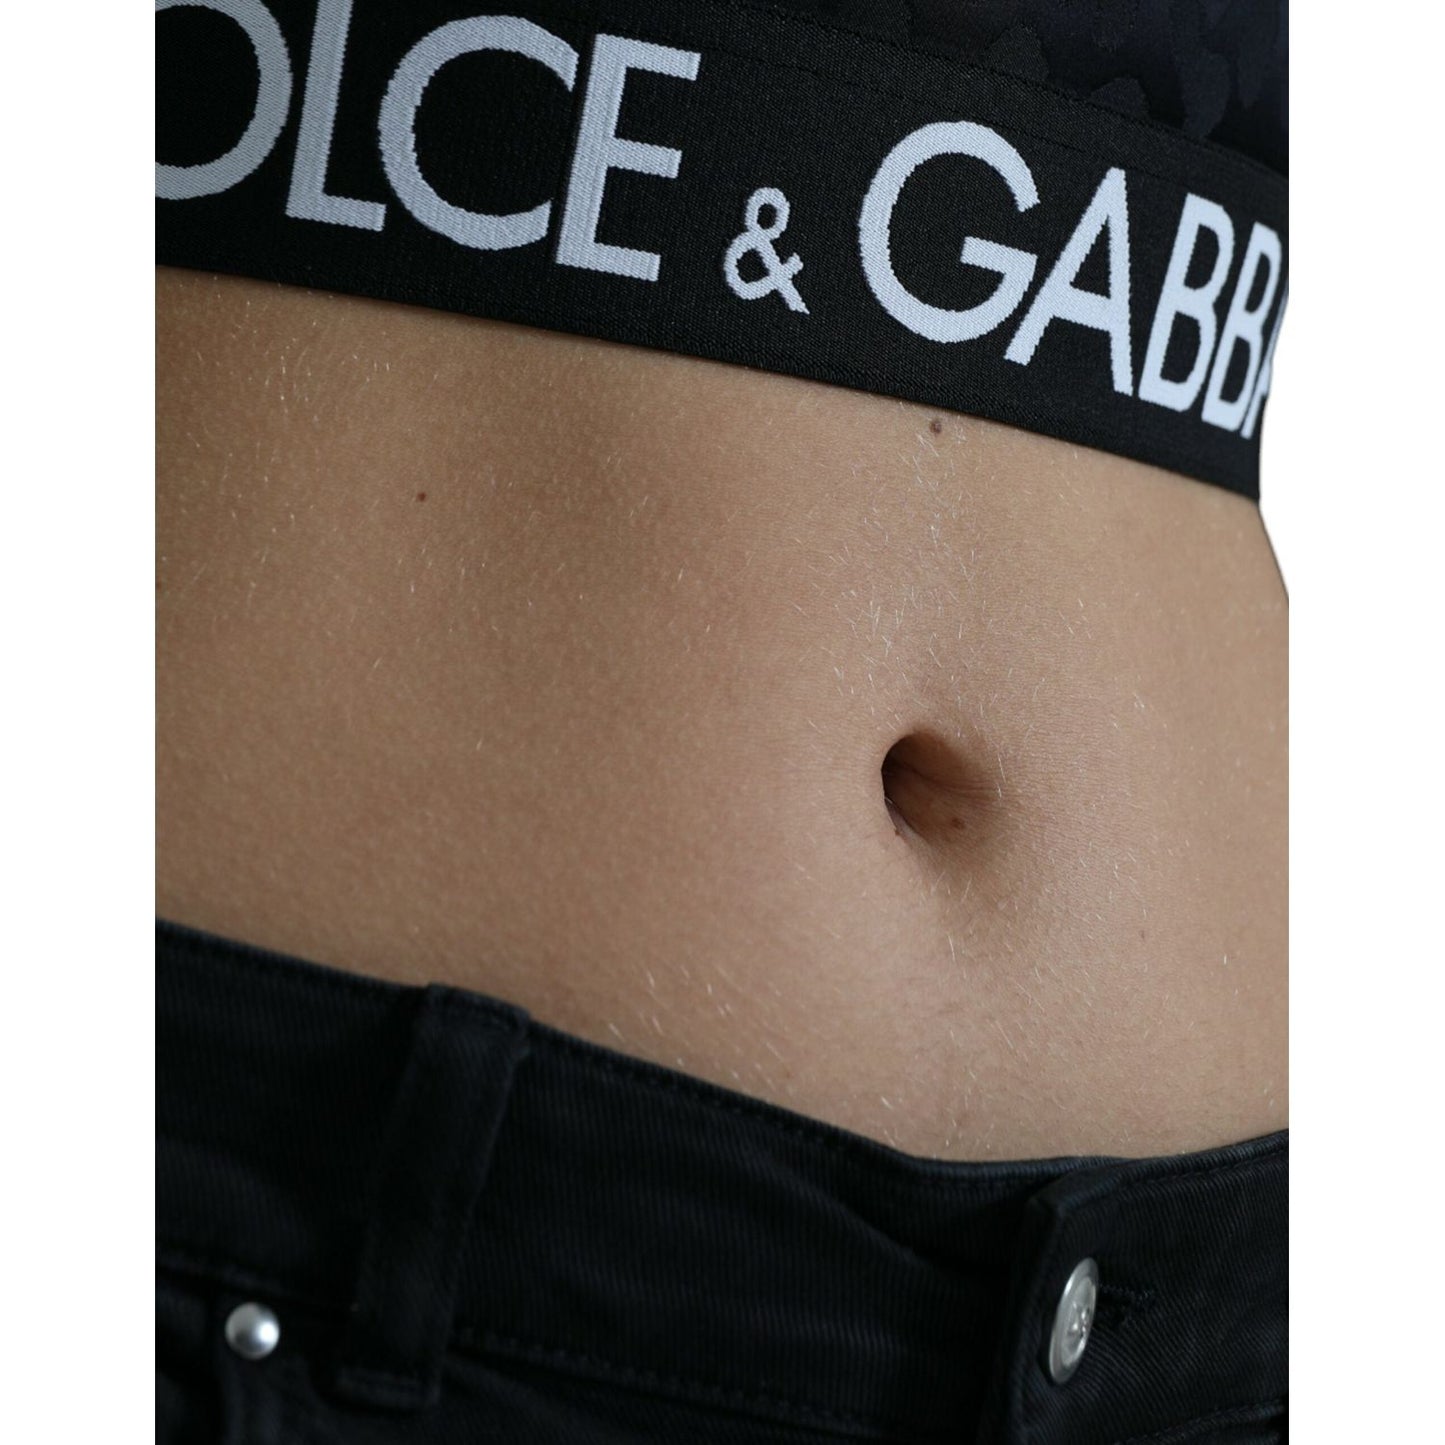 Dolce & Gabbana Elegant Black Cropped Top with Zip Closure elegant-black-cropped-top-with-zip-closure